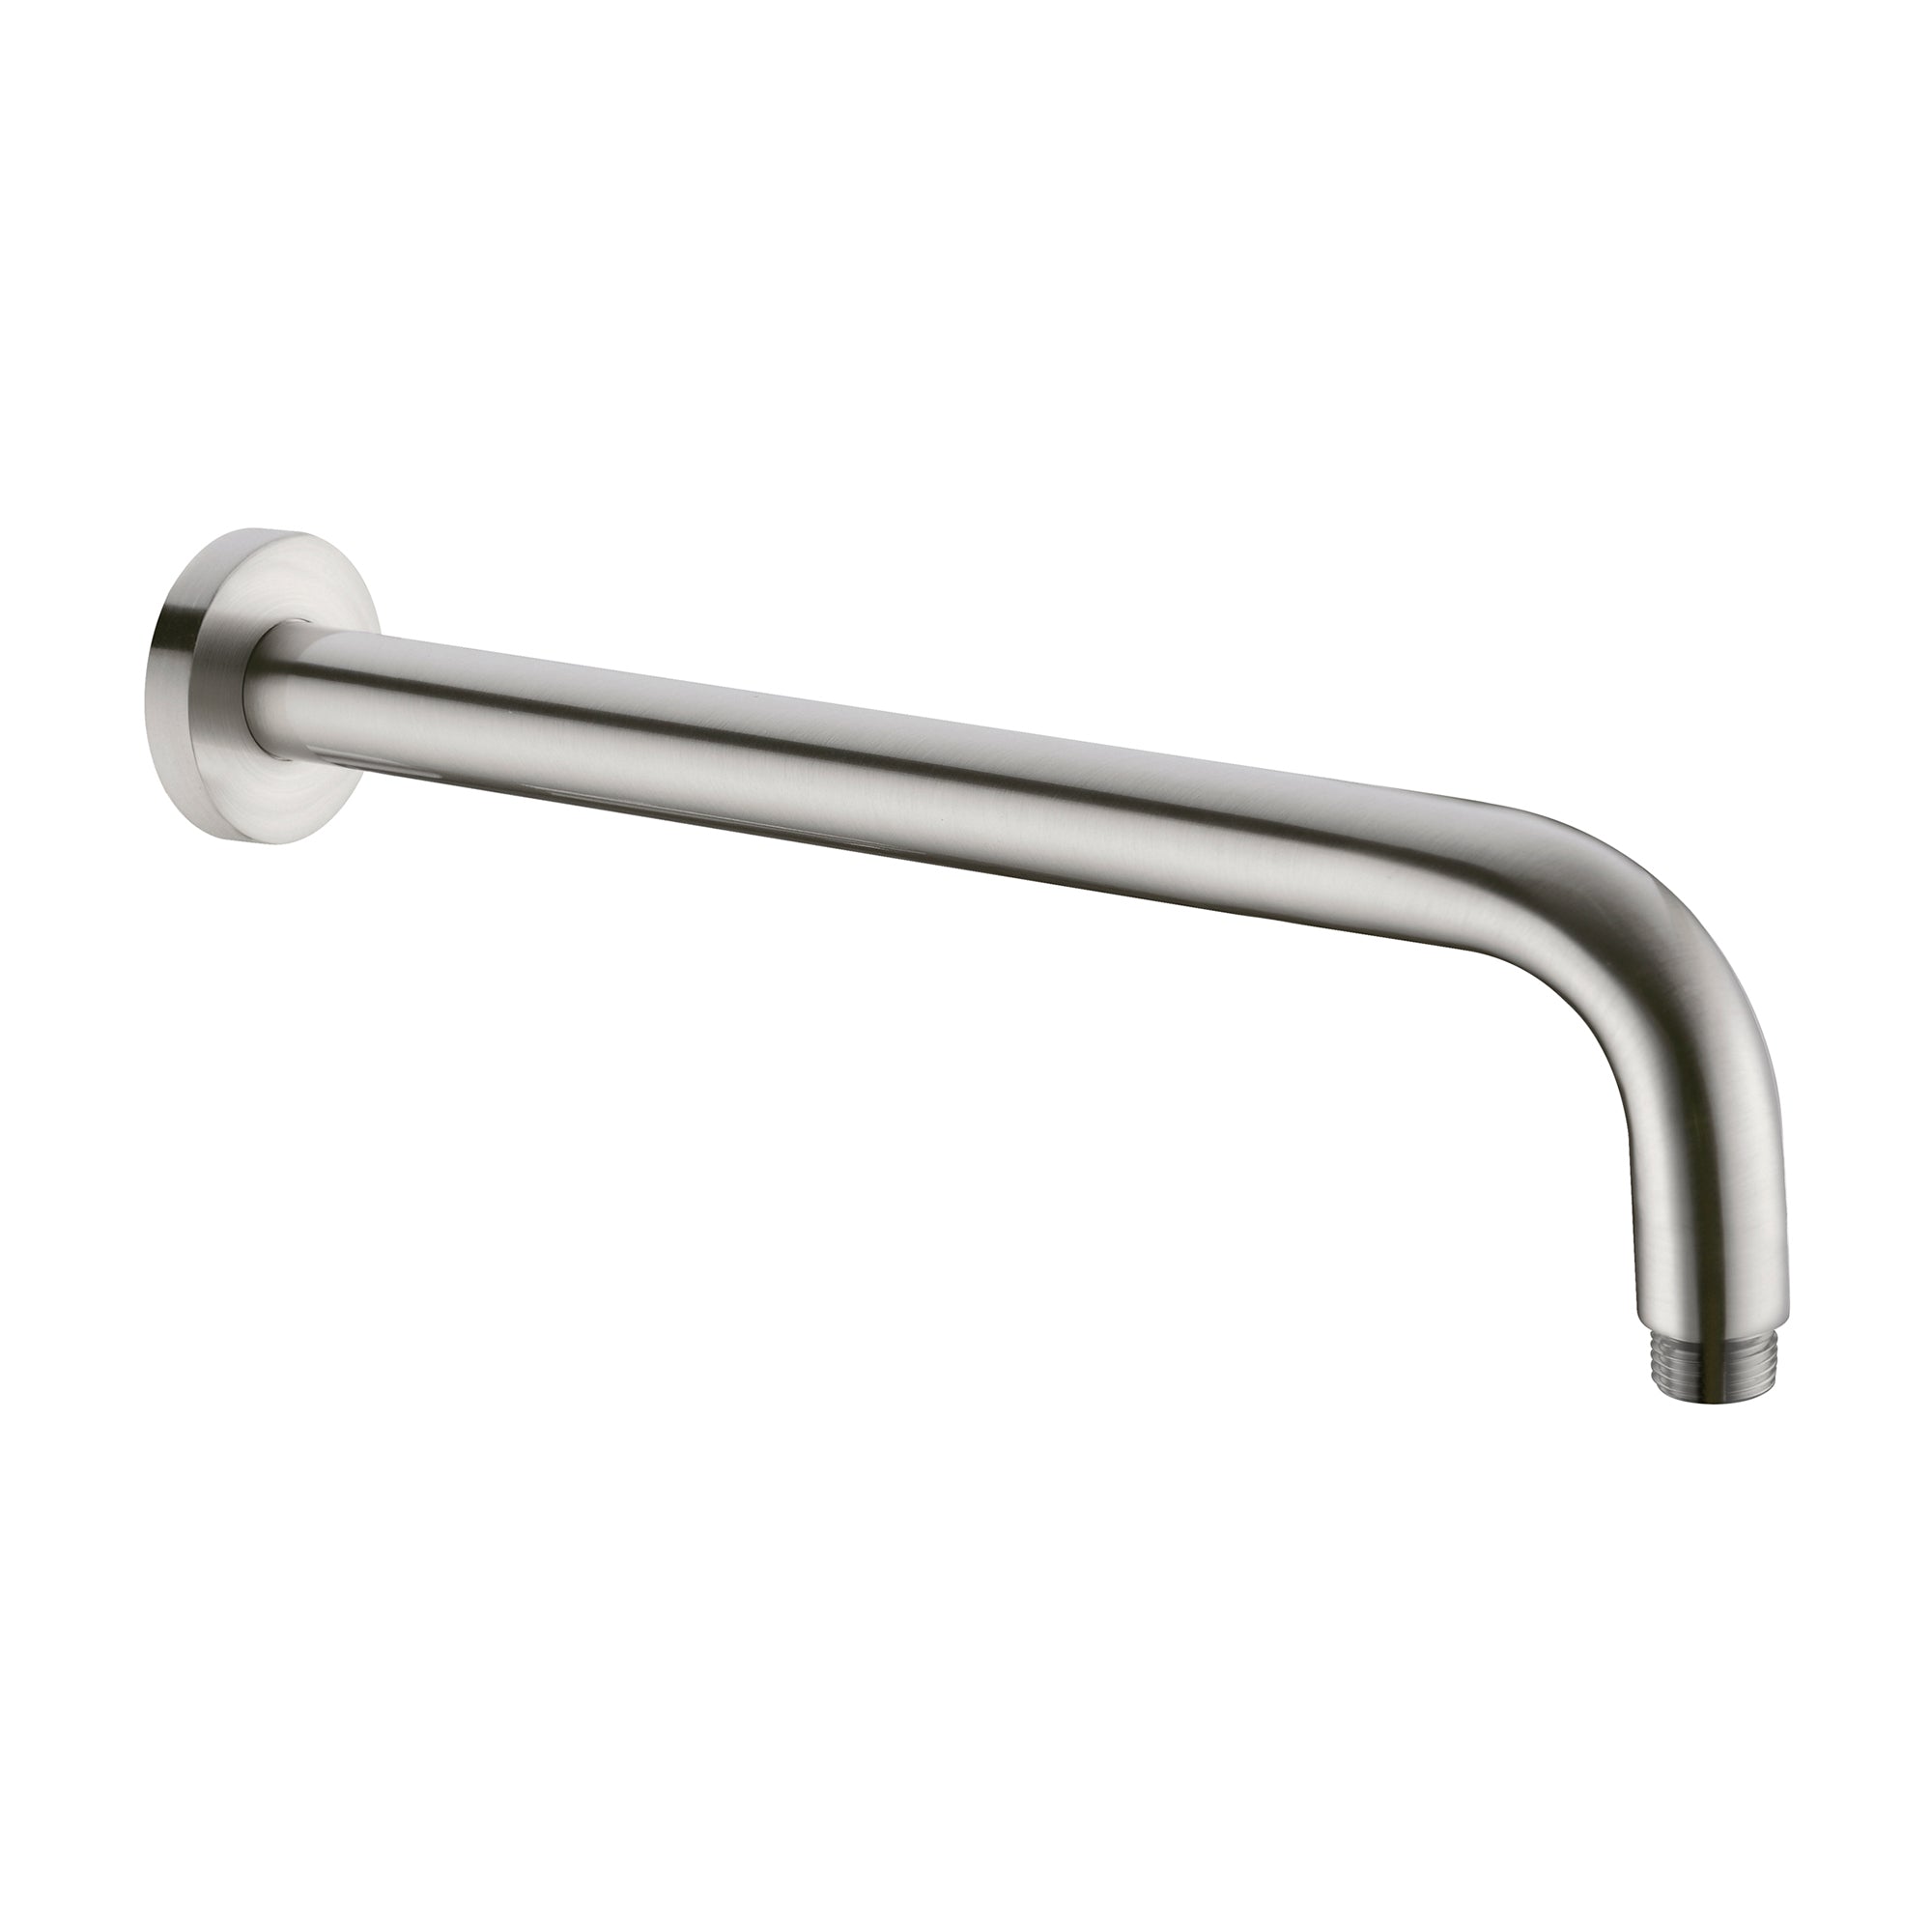 ROUND SHOWER ARM 330MM LENGTH BRUSHED NICKEL